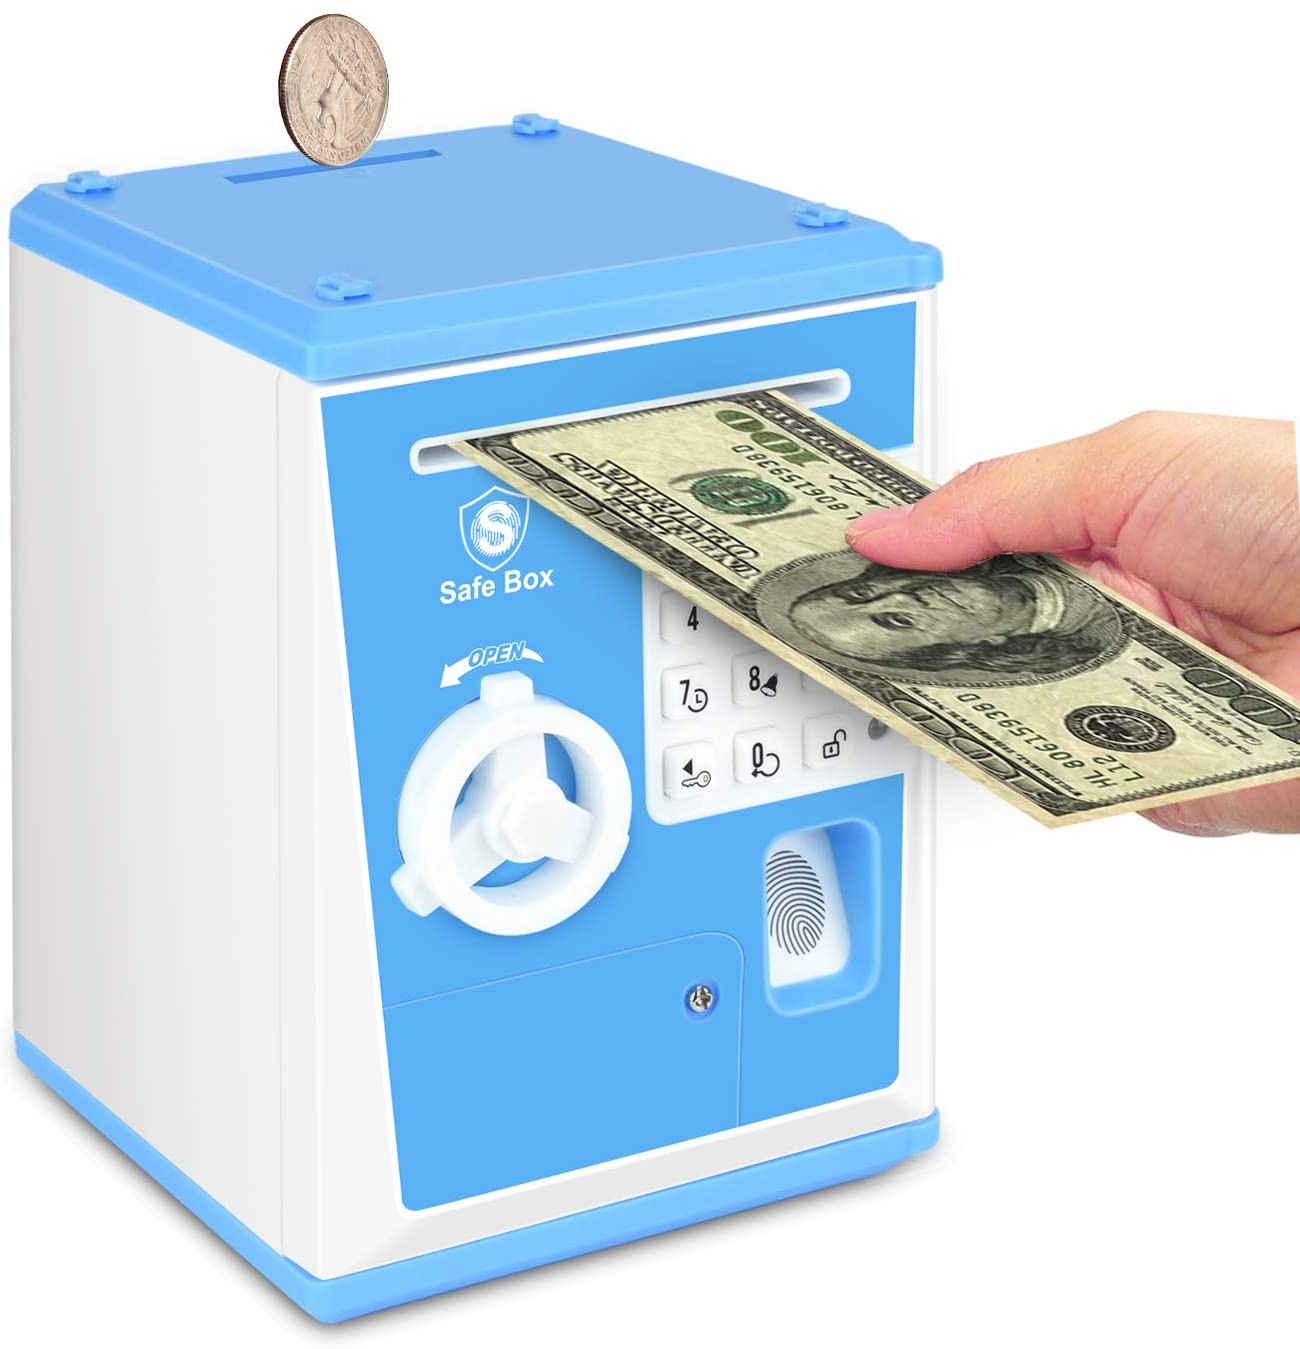 Lefree ATM Savings Bank,Money Bank with Electronic Auto Scroll Paper Cash,Simulate Fingerprint ATM Piggy Bank for Real Money,Alarm Clock and Broadcast Time Money Safe for Kids